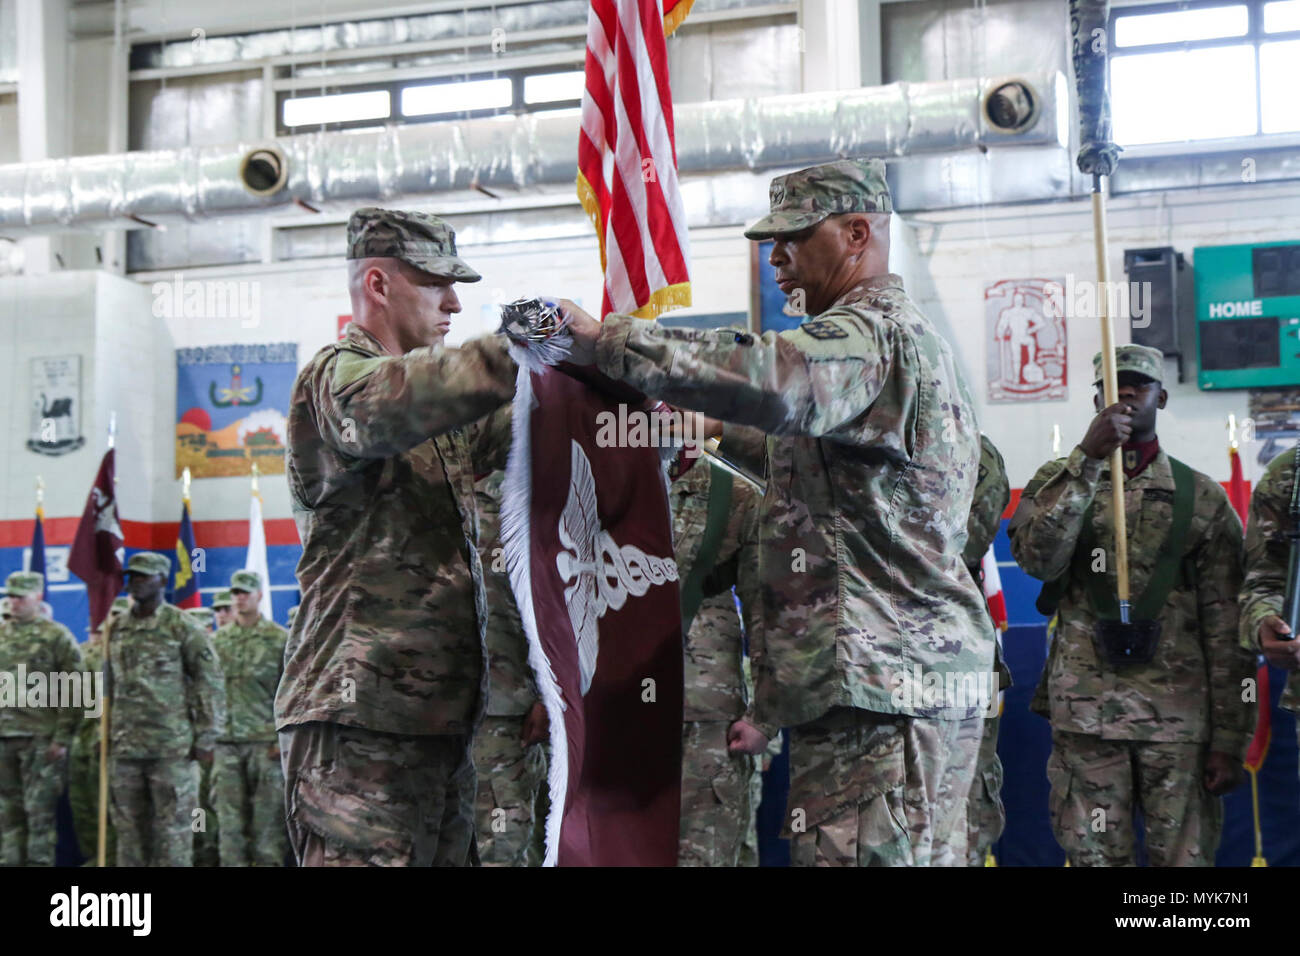 Col. George Kyle (right), the commander of the 31st Combat Support Hospital, and Command Sgt. Maj. Robert Nelson, the command sergeant major for the 31st CSH, cases the unit’s colors, during the transfer of authority ceremony, in the Zone 1 Fitness Center, Camp Arifjan, Kuwait, May 5. The ceremony marked the last deployment for the 31st CSH, as it will transform into a field hospital unit upon returning to the United States. Stock Photo